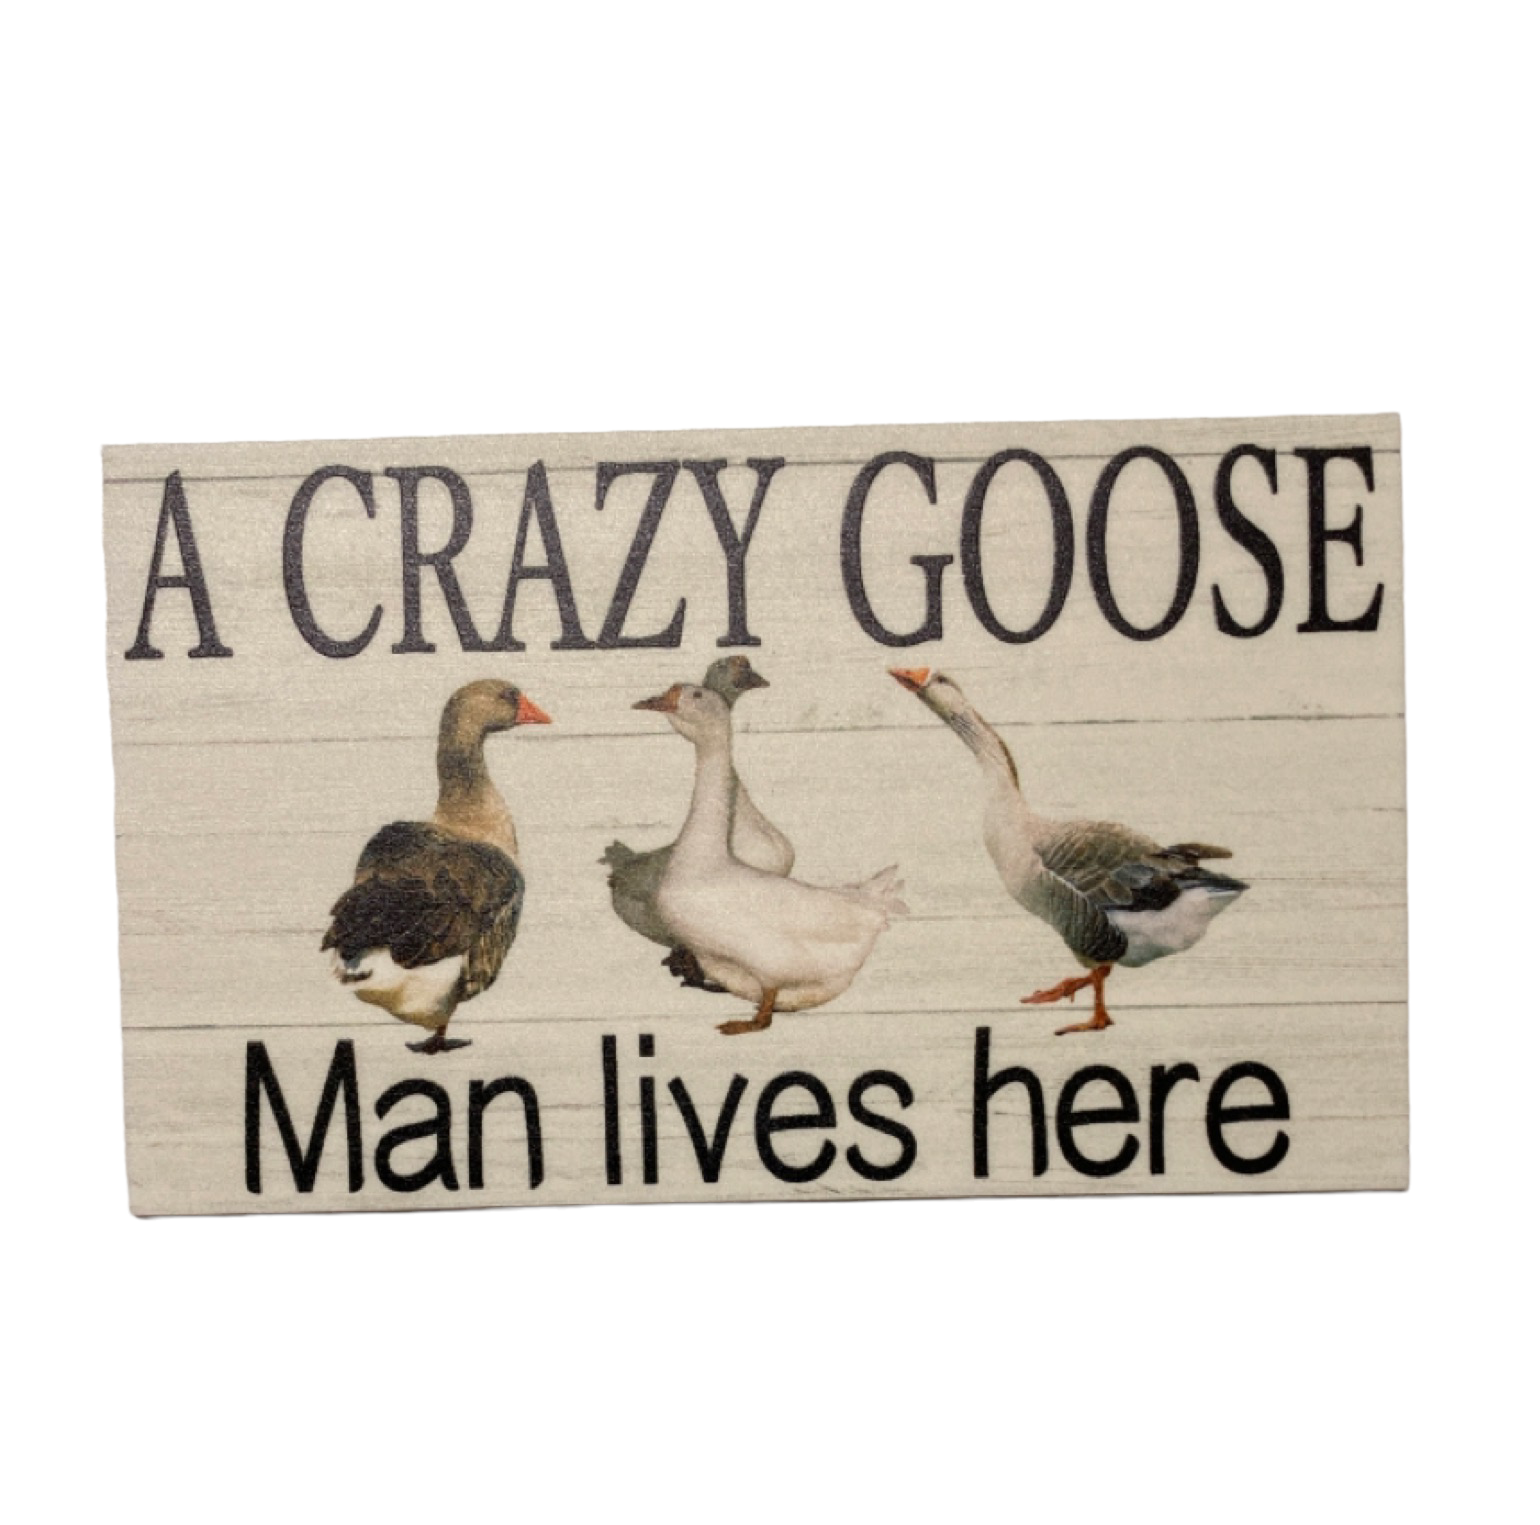 Crazy Goose Geese Man Lives Here Sign - The Renmy Store Homewares & Gifts 